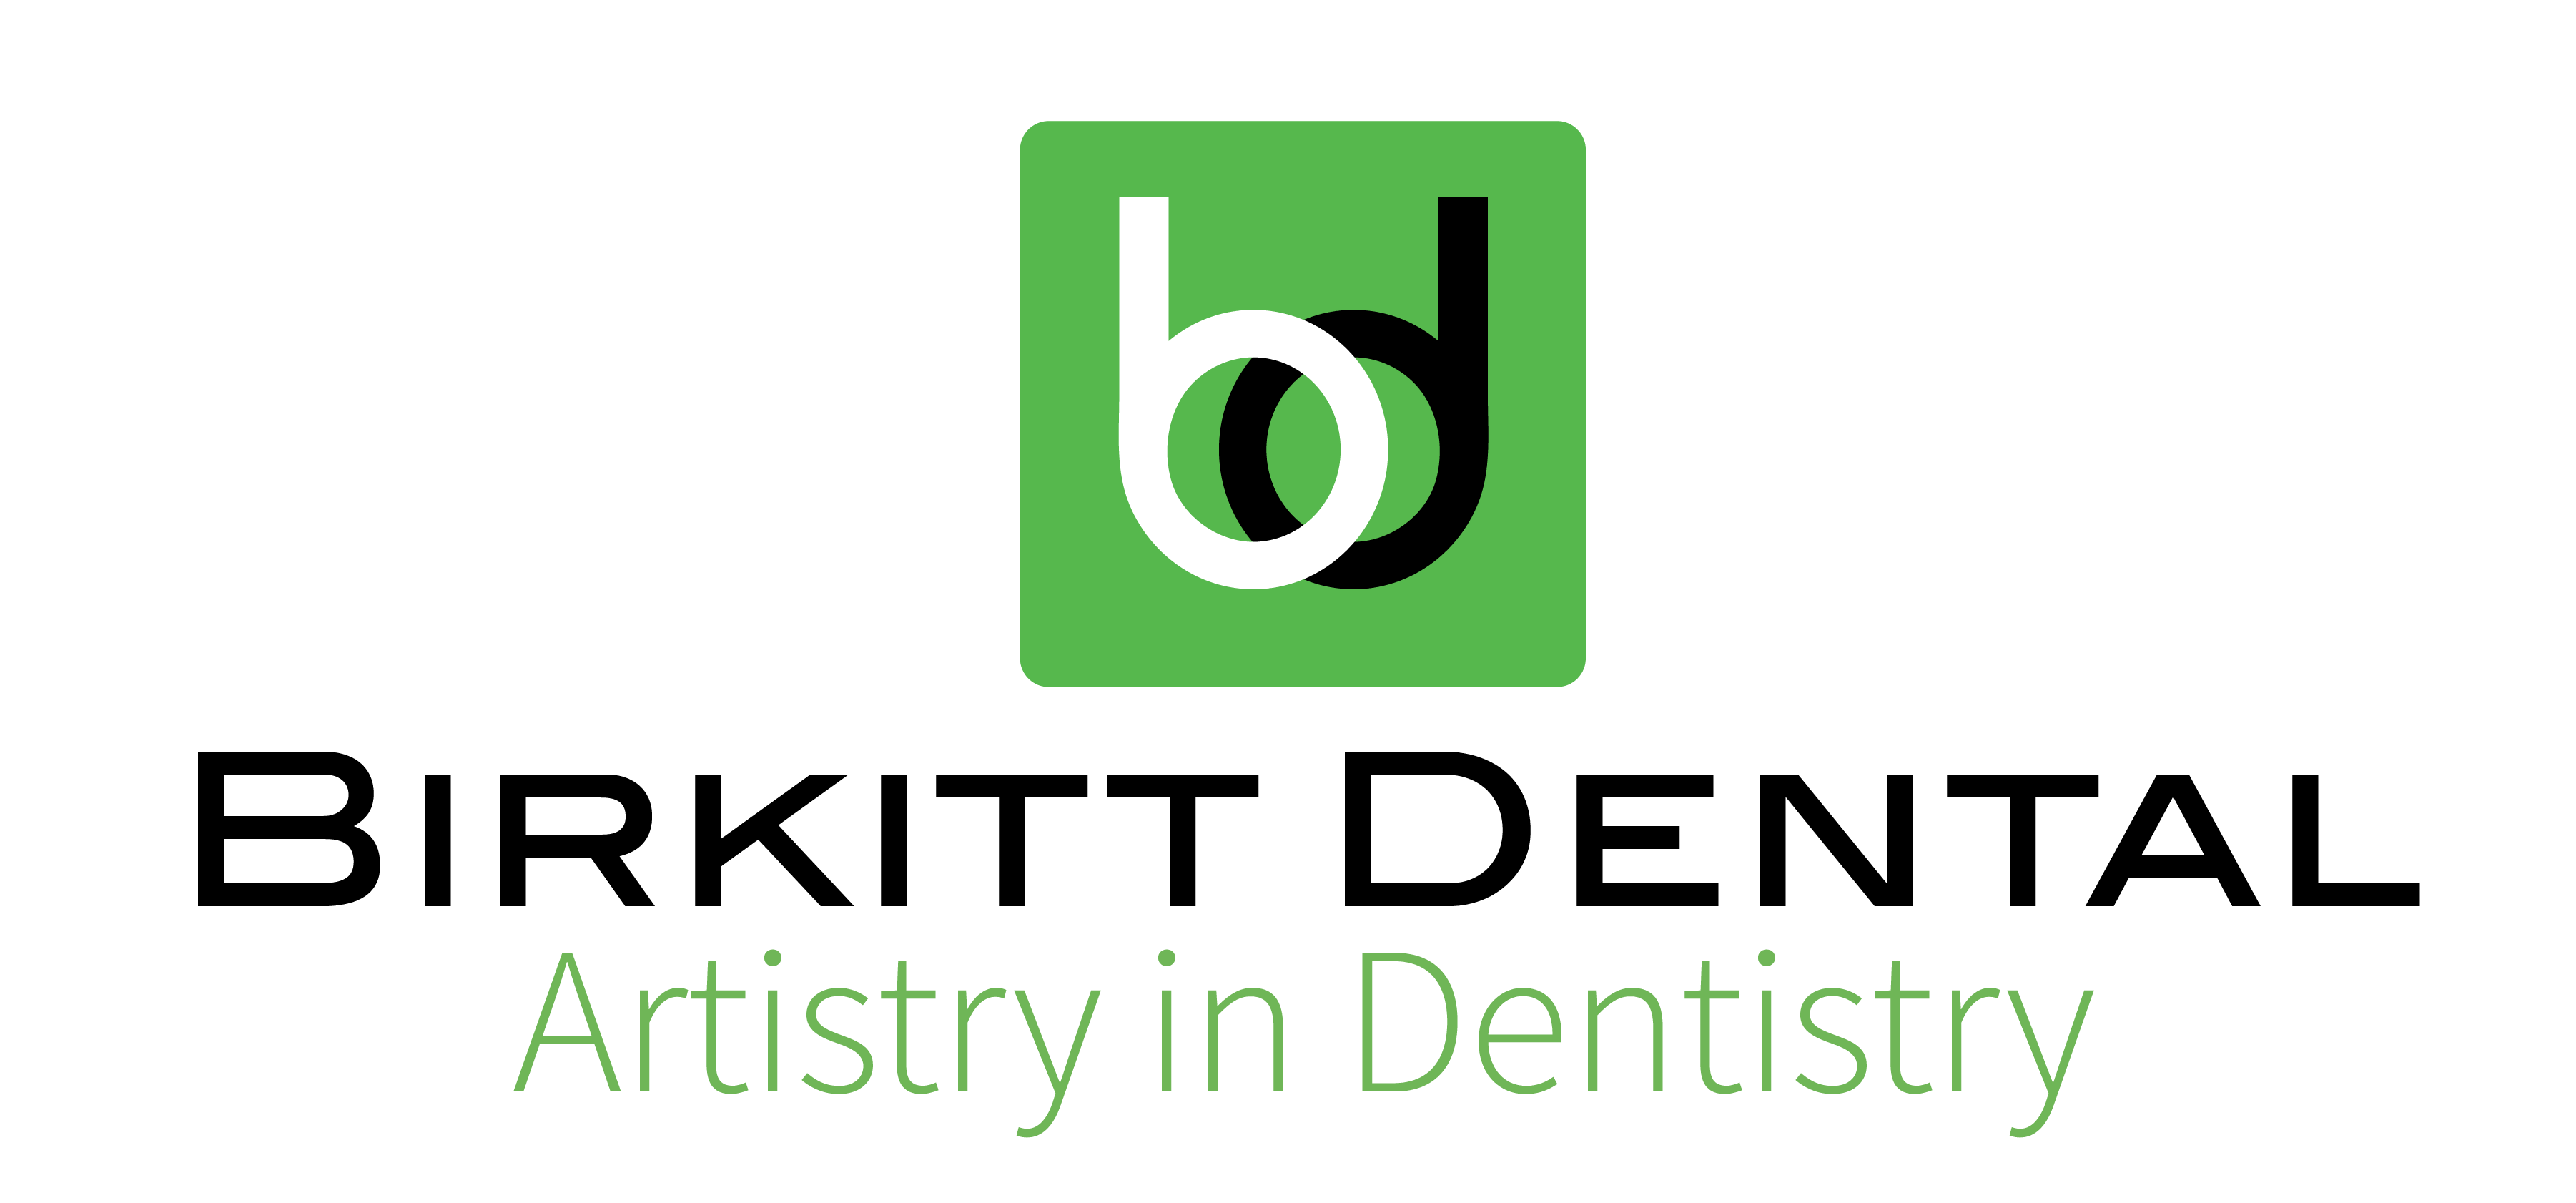 Birkitt Dental – Artistry in Dentistry  - Family Dentist in Leesburg VA. Helping families with their dental needs for over 50 years.